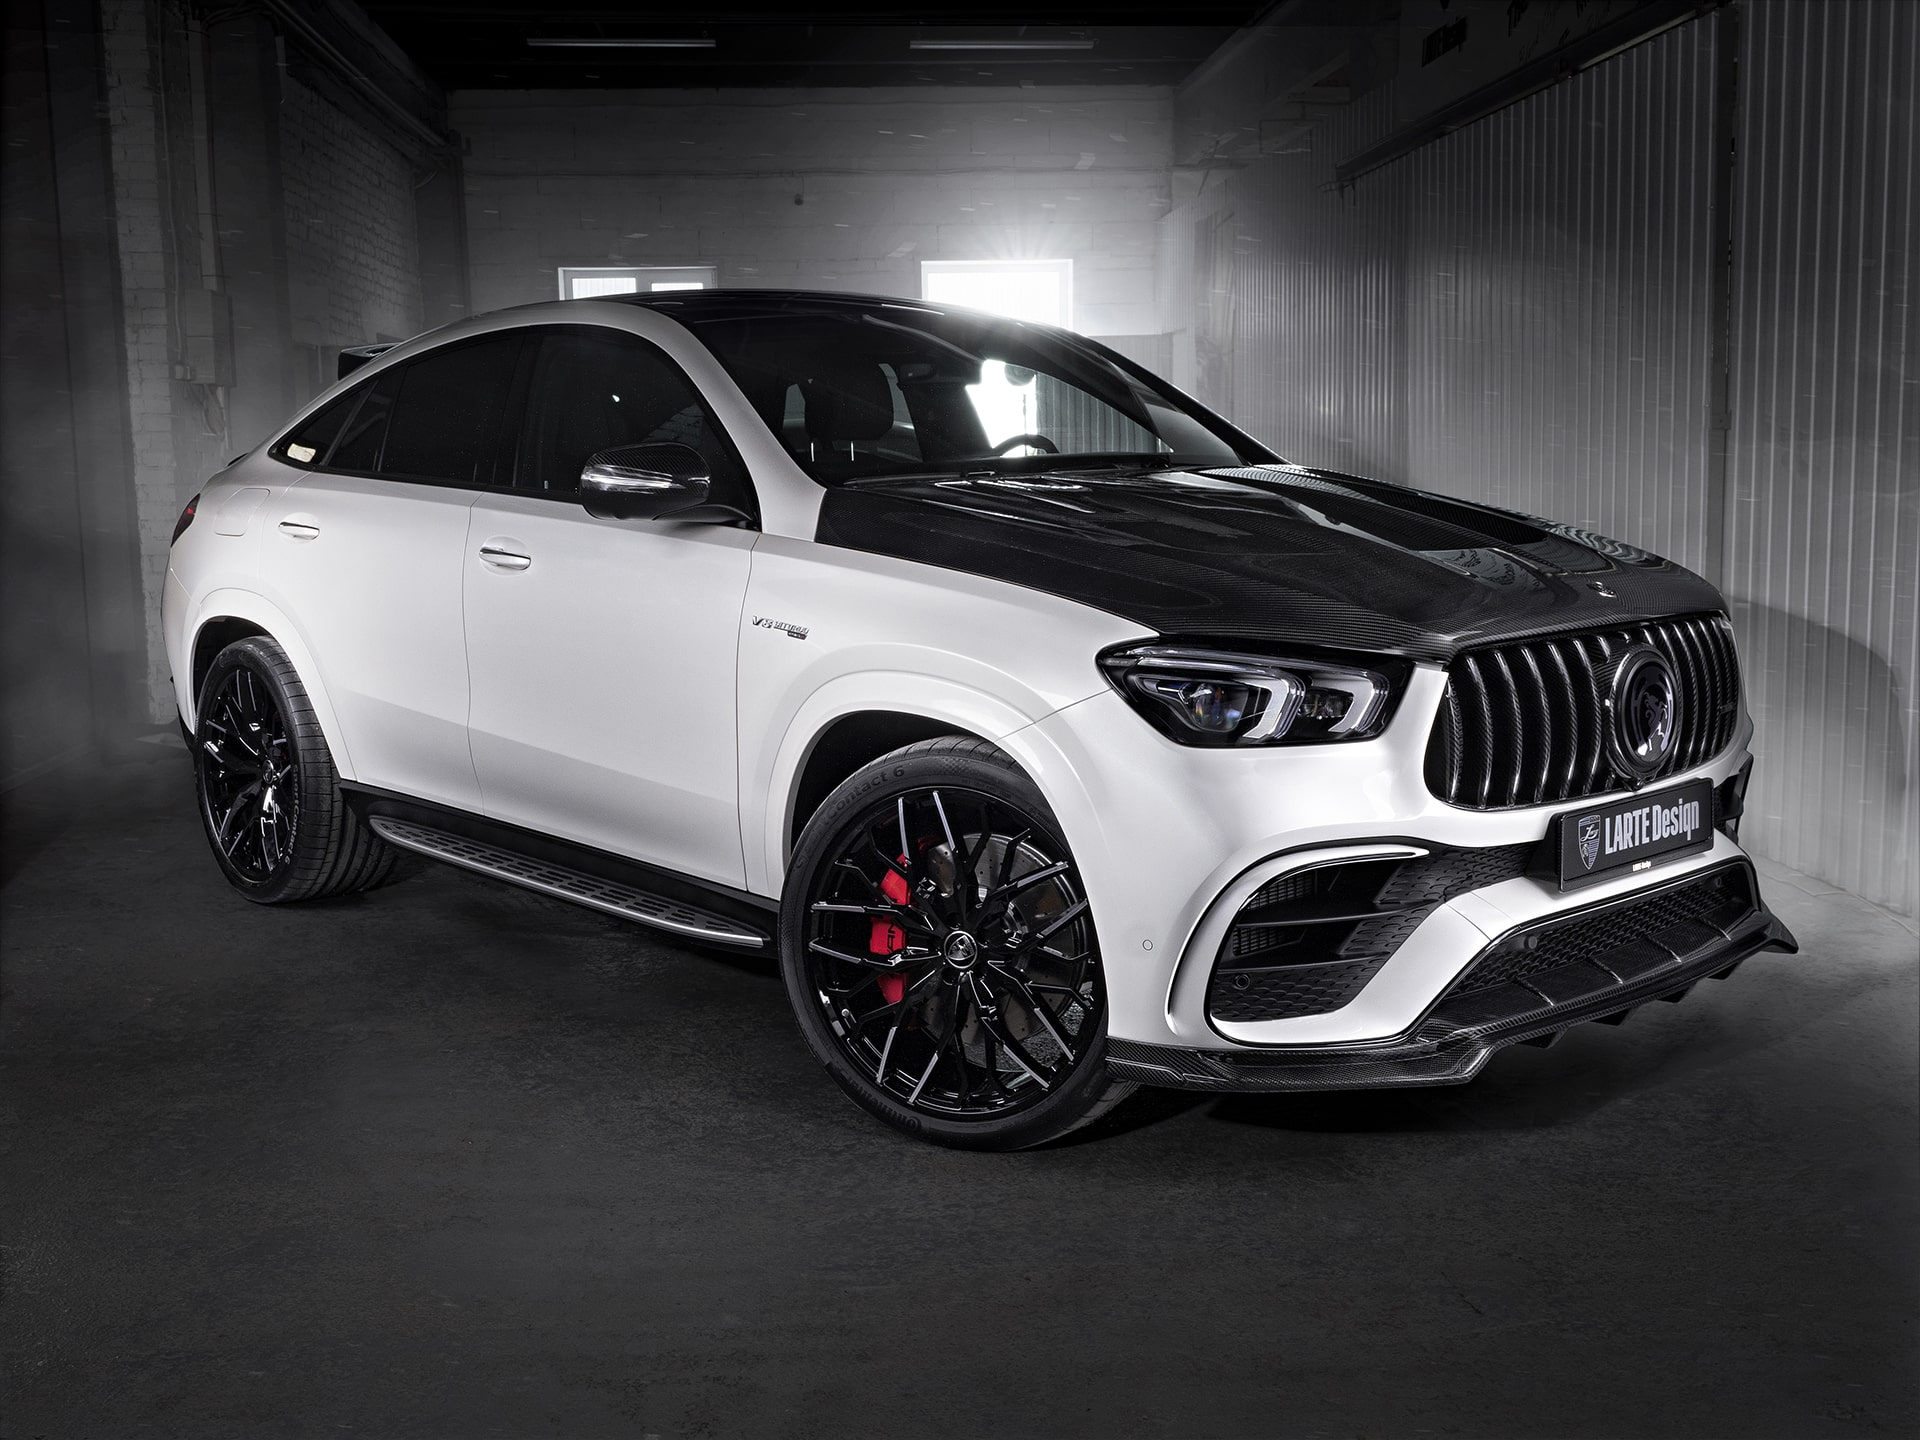 Body kit for GLE Coupe. Buy a sports body kit for the GLE Coupe 63 S 2021